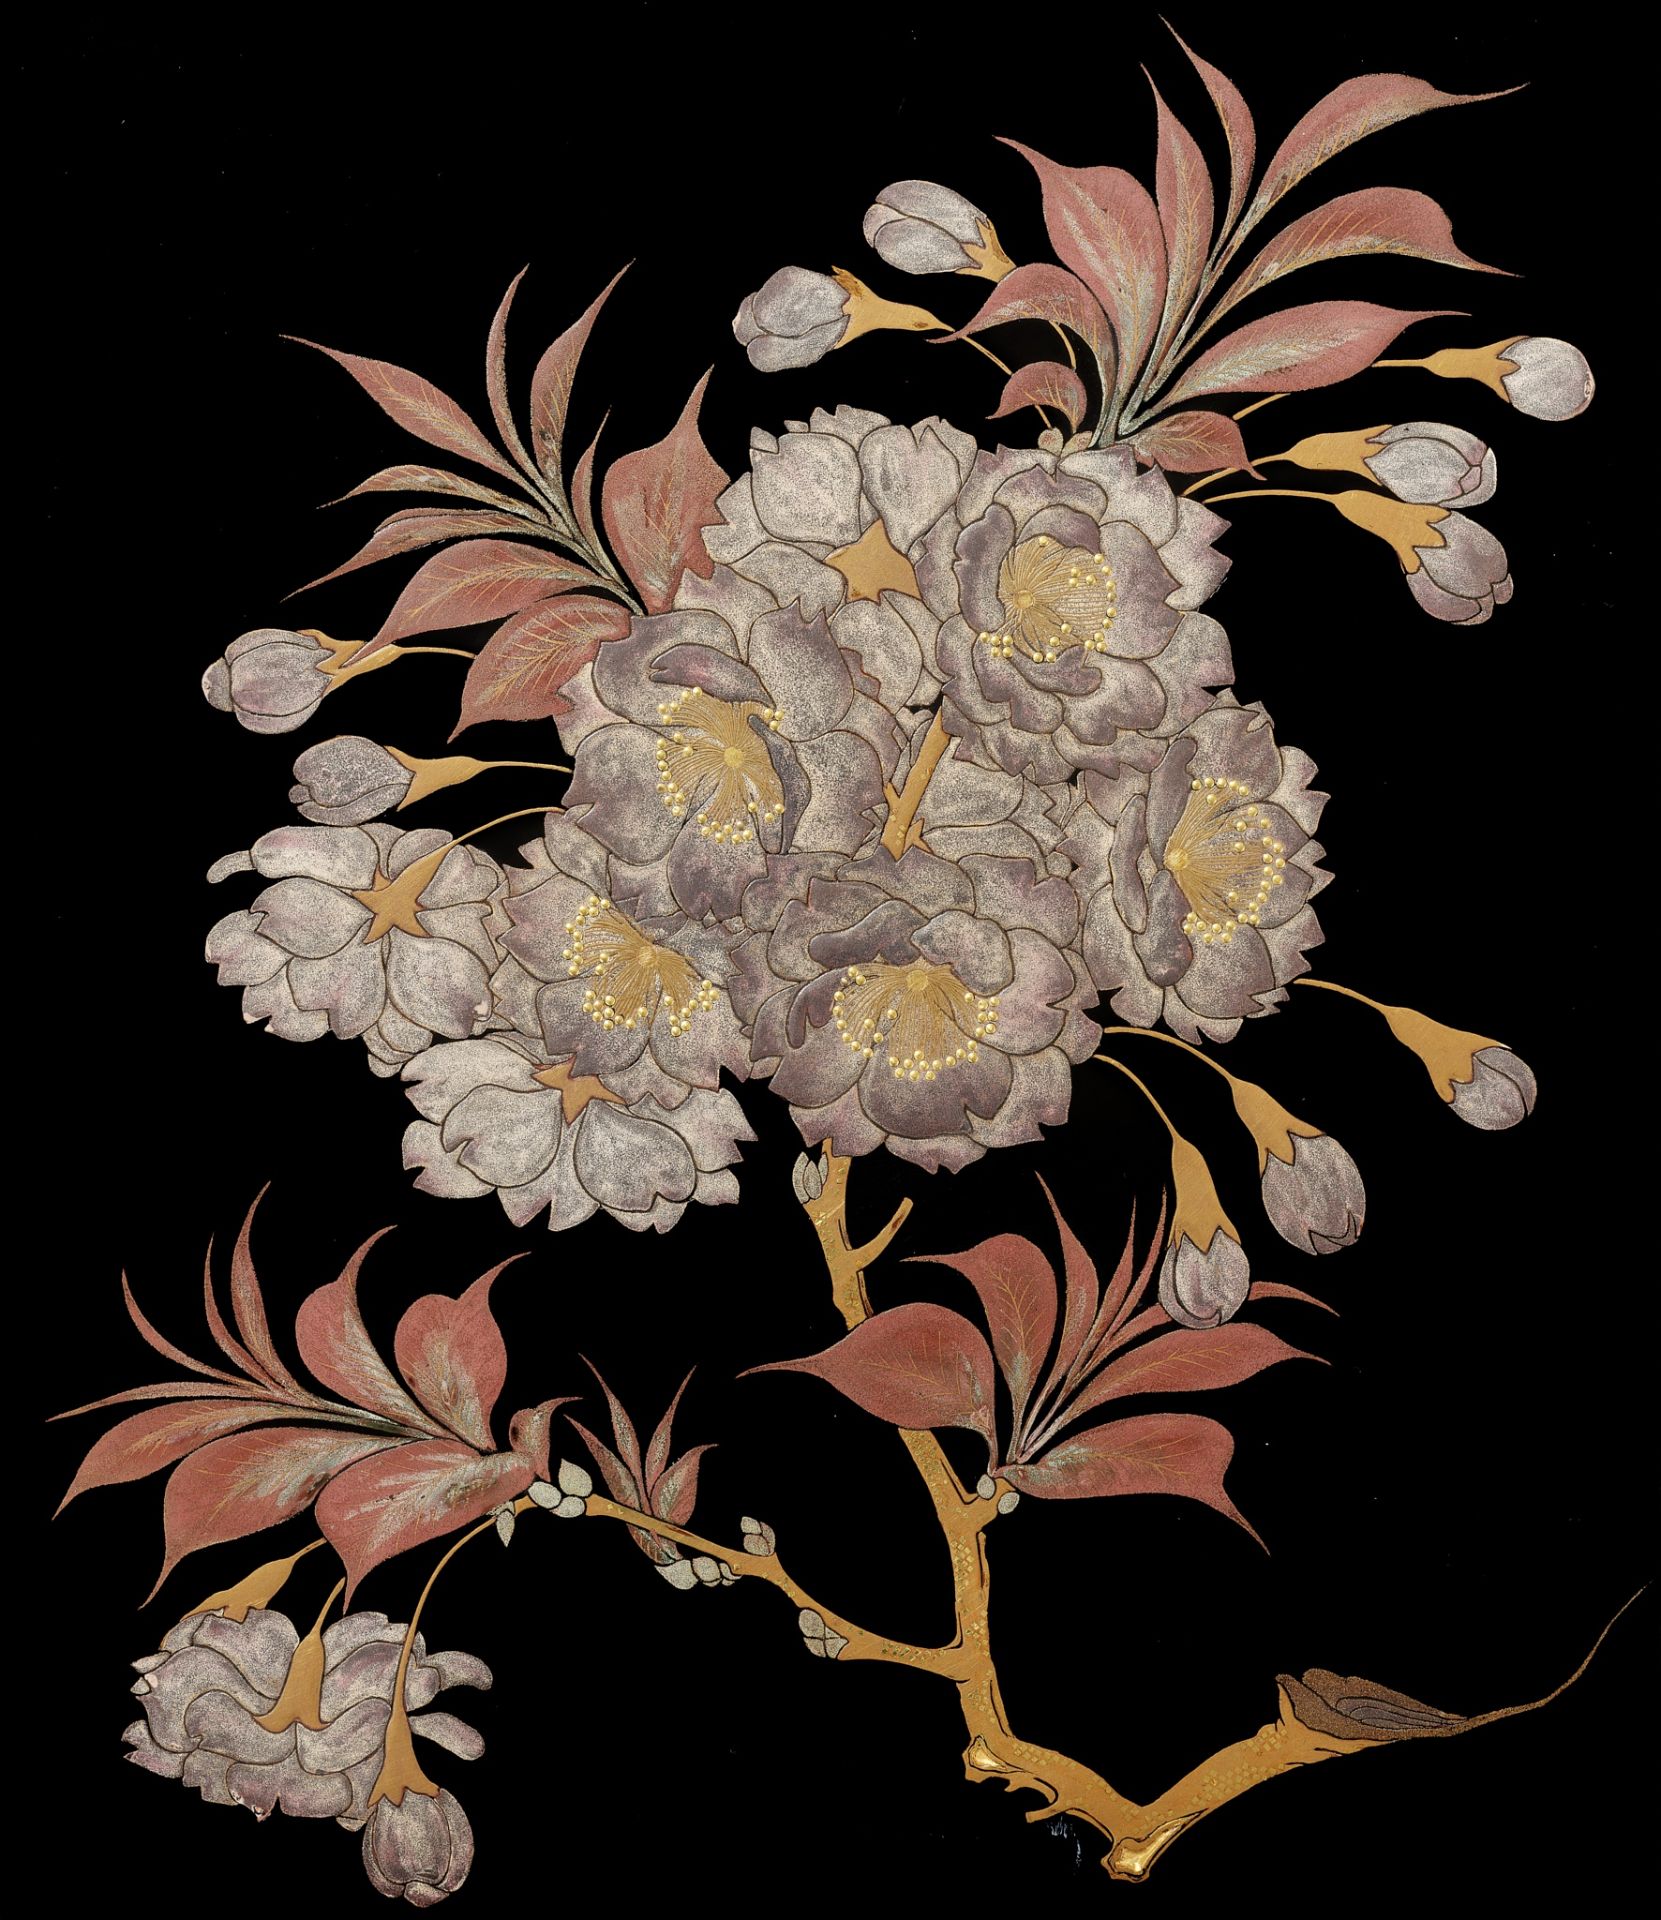 A LACQUER SUZURIBAKOO DEPICTING BLOSSOMING BELLFLOWERS (KIKYO) AND MAPLE LEAVES - Image 3 of 9